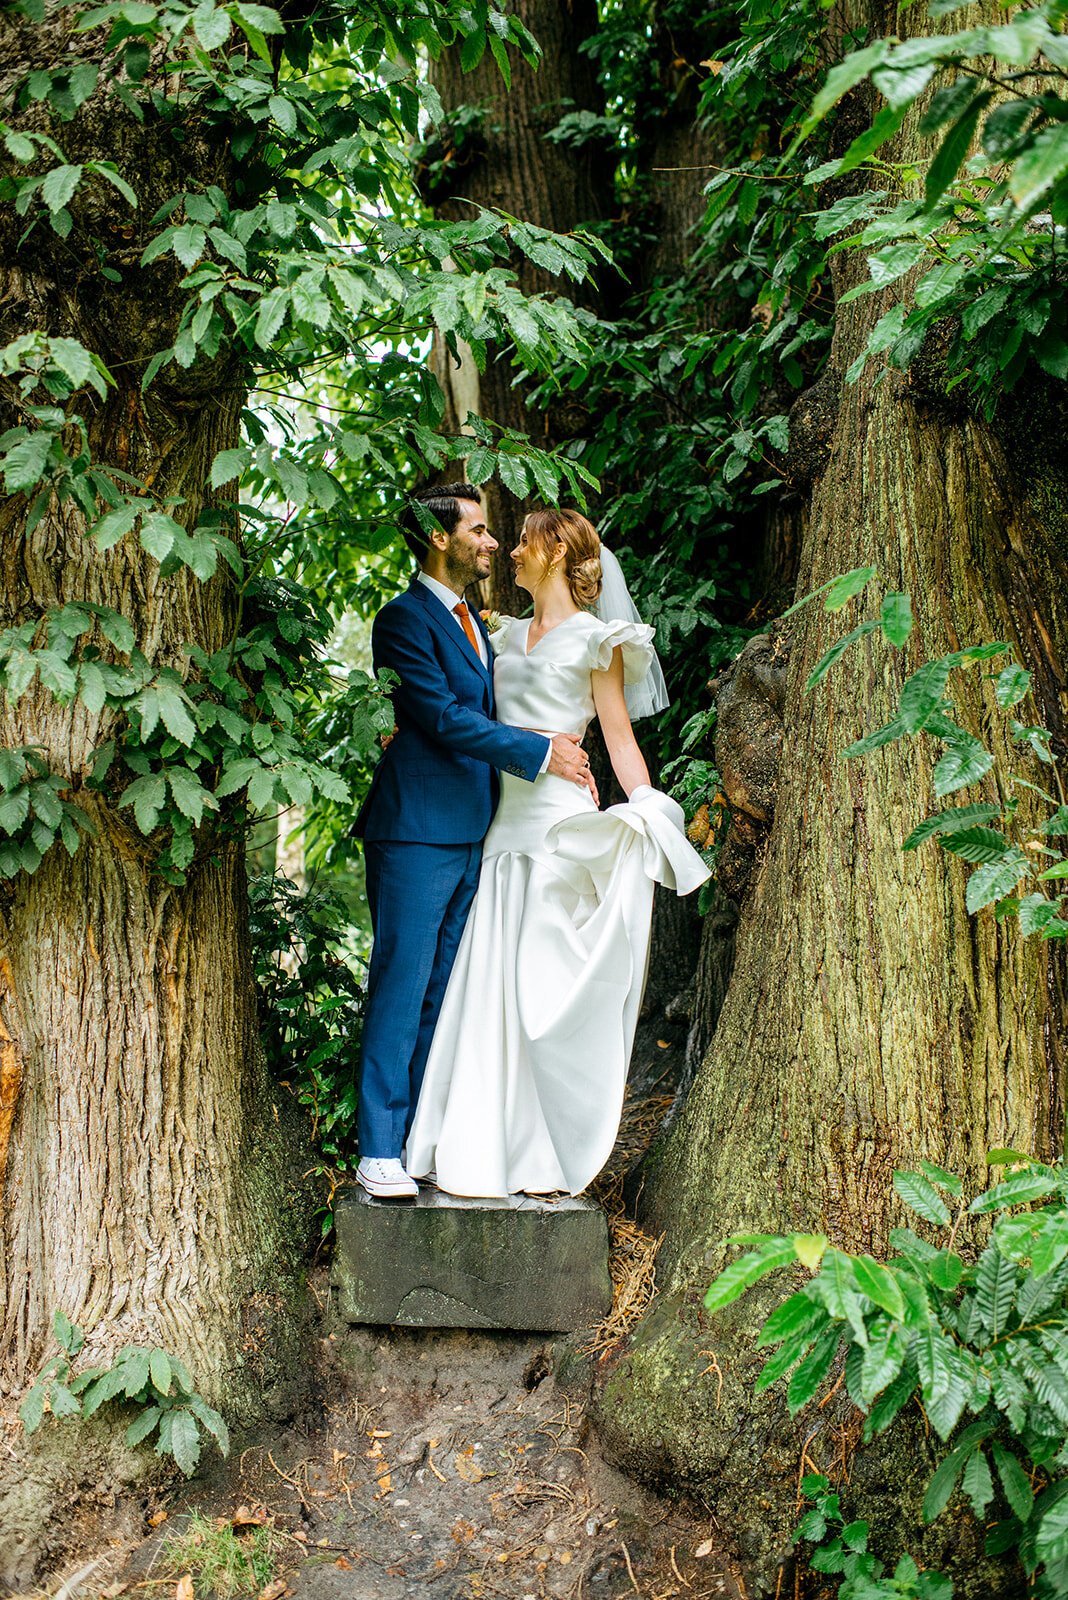 Beautiful bride Steph wore the George top and skirt by Halfpenny London for her wedding day